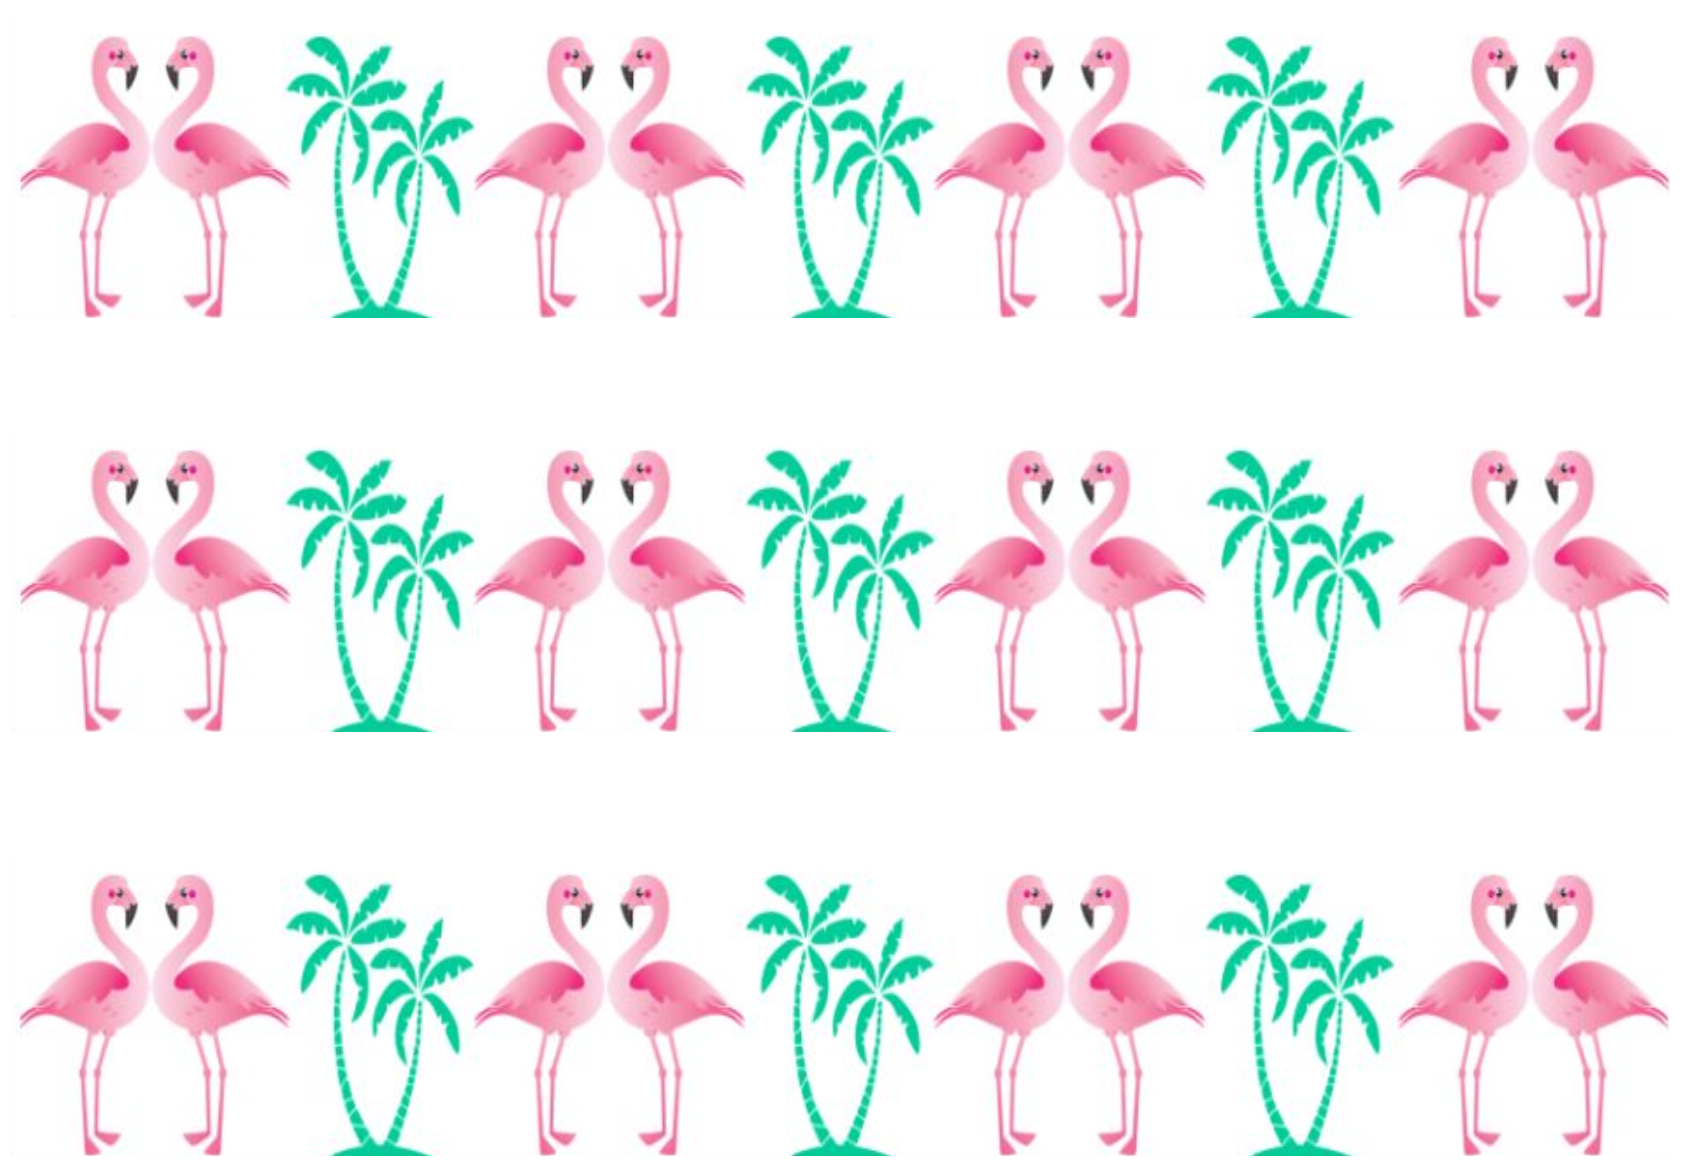 FLAMINGO & PALM TREES  EDIBLE ICING CAKE RIBBON / SIDE STRIPS   Use instead of traditional ribbon to decorate the sides of your cakes  Edible fondant icing, perfect for that special occasion